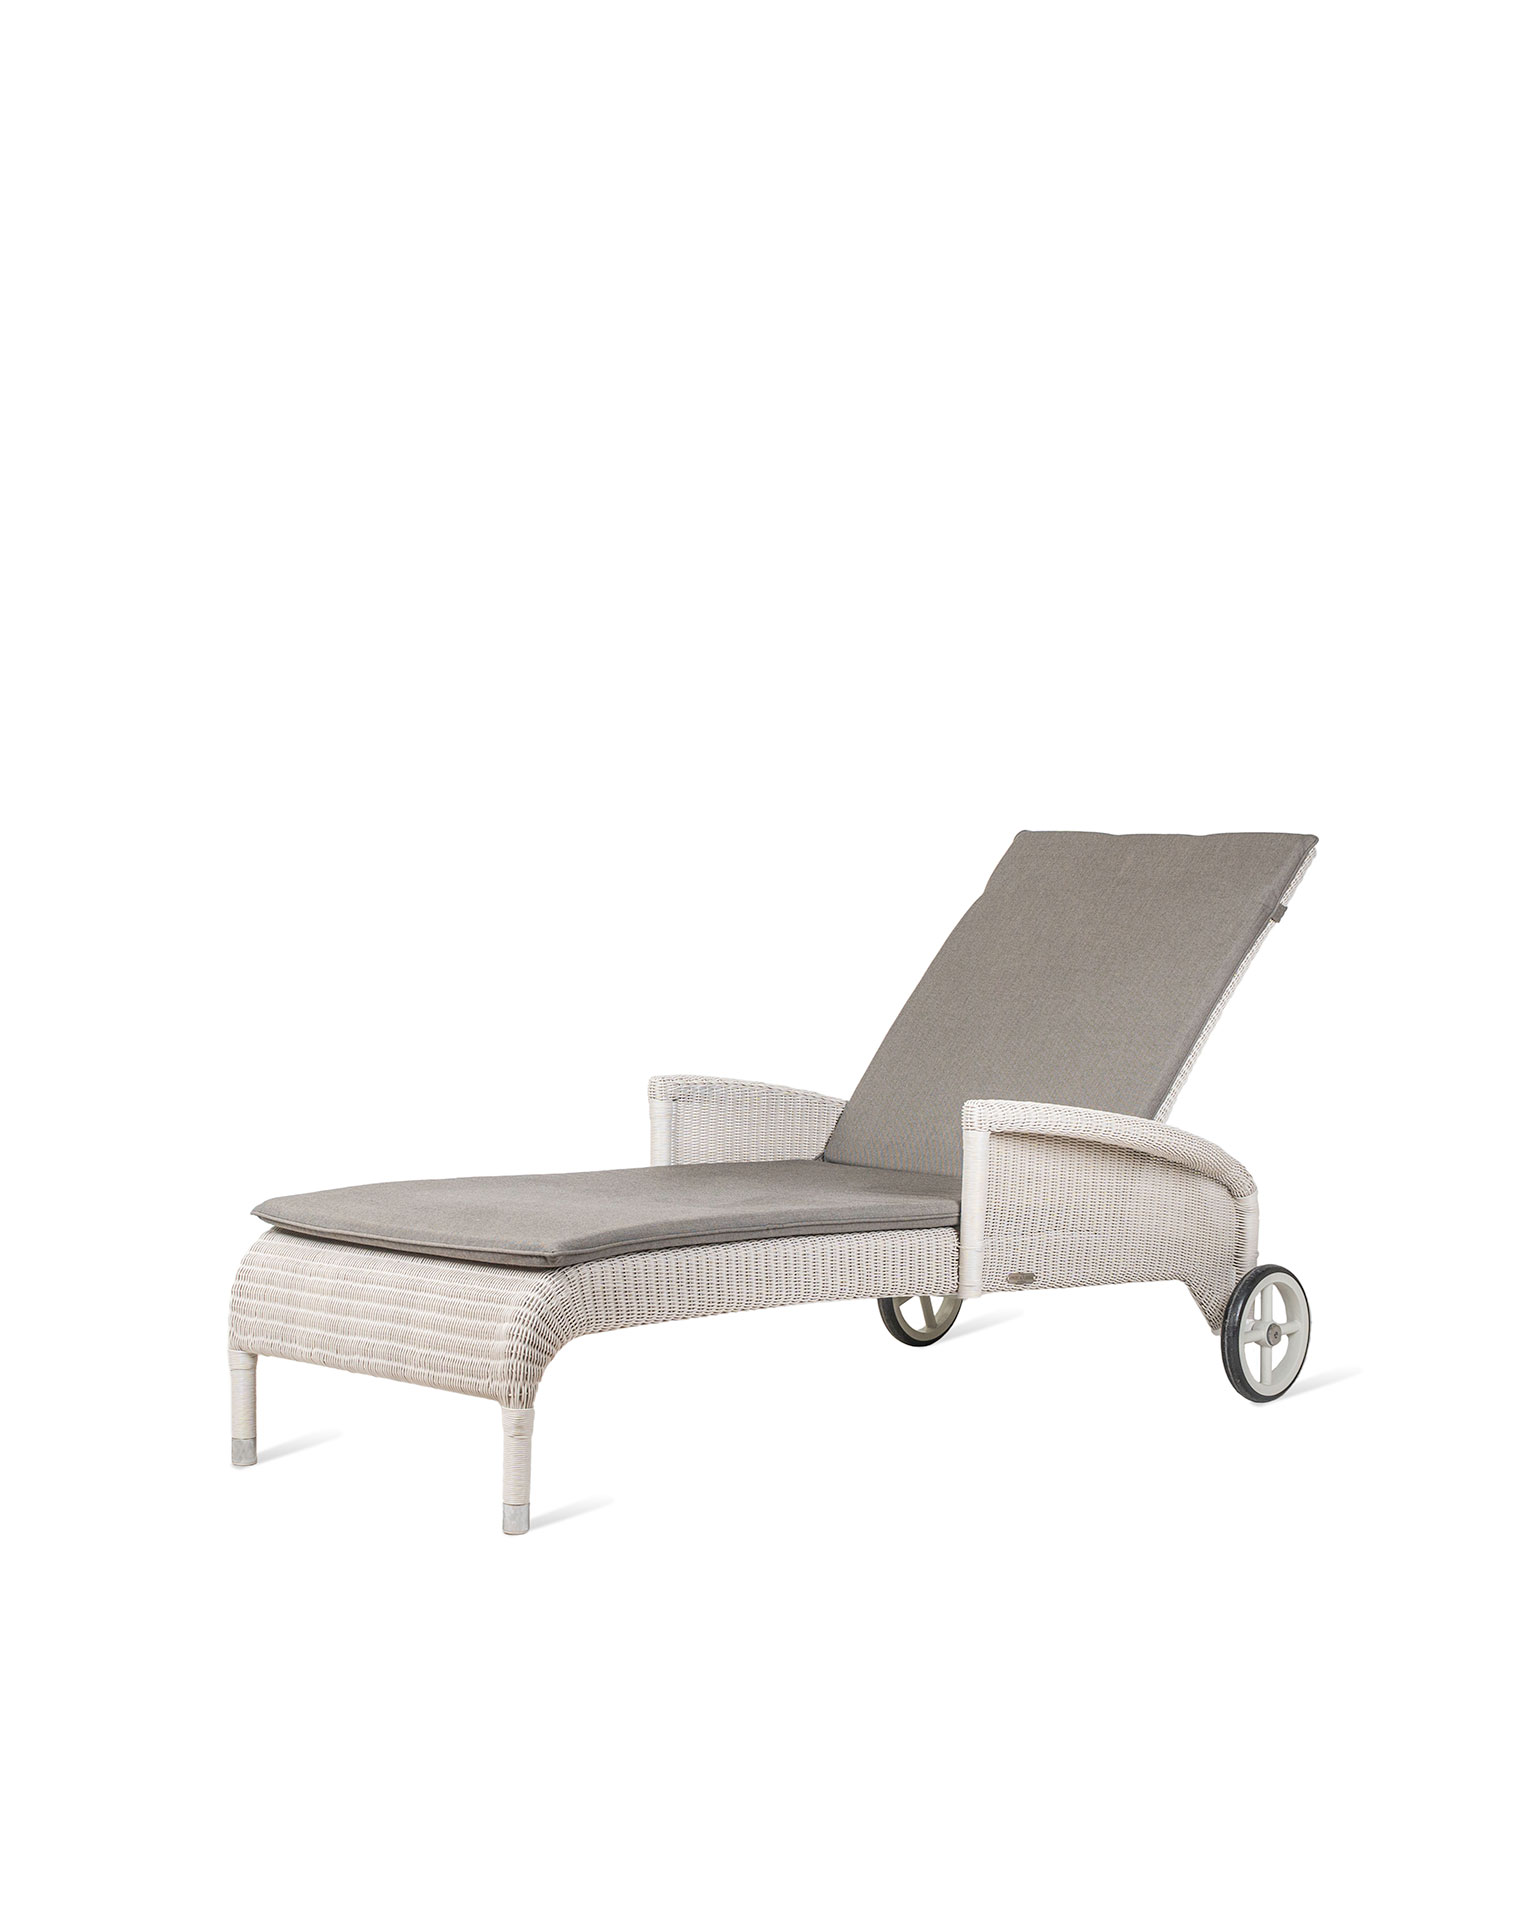 SAFI Sunlounger with Arms